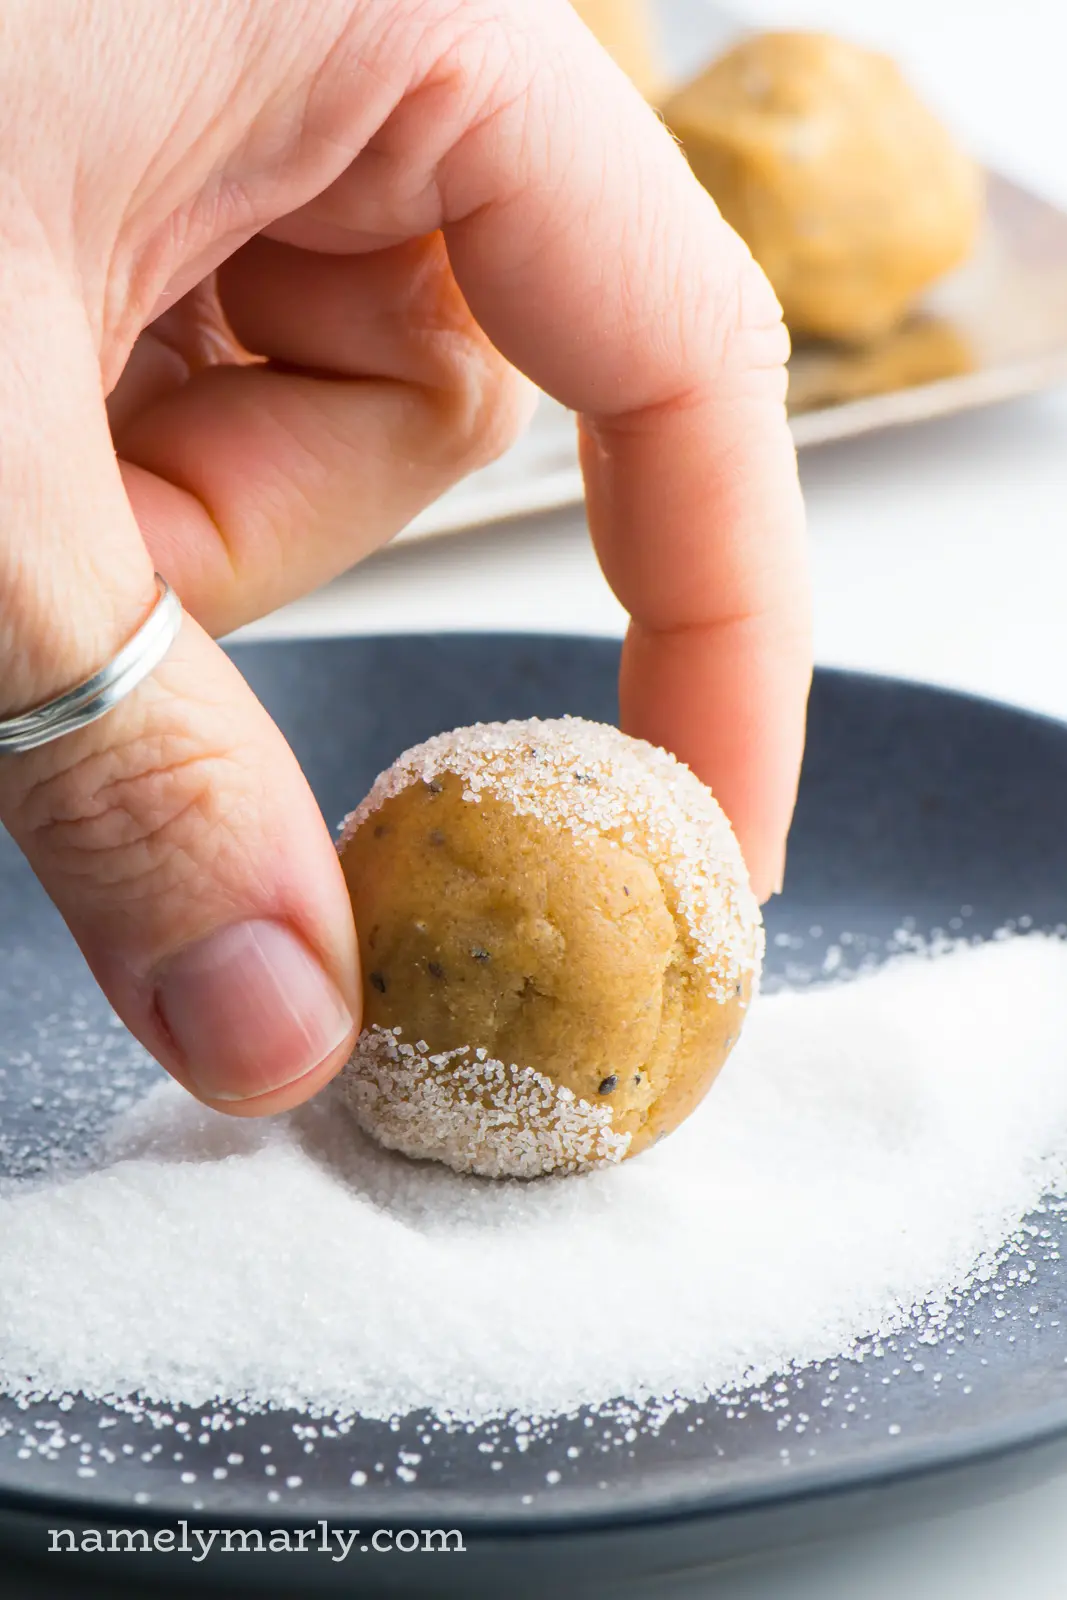 A hand is holding a vegan peanut butter cookie dough ball over a plate of sugar. The cookie dough ball has been partially rolled in the sugar.